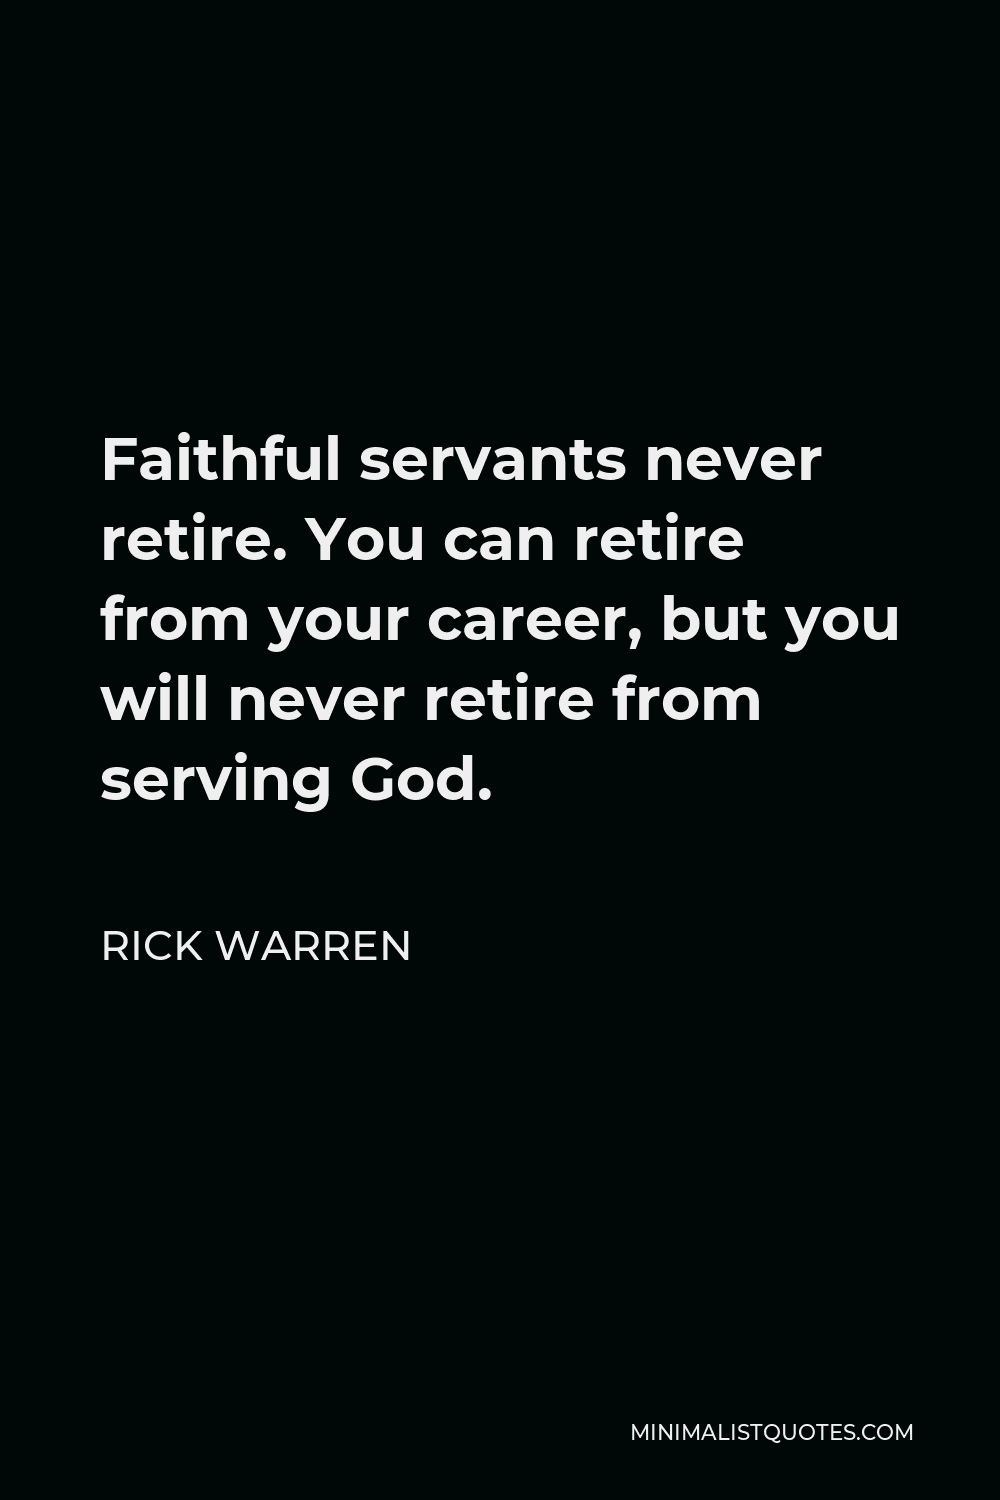 Rick Warren Quote - Faithful servants never retire. You can retire from your career, but you will never retire from serving God.